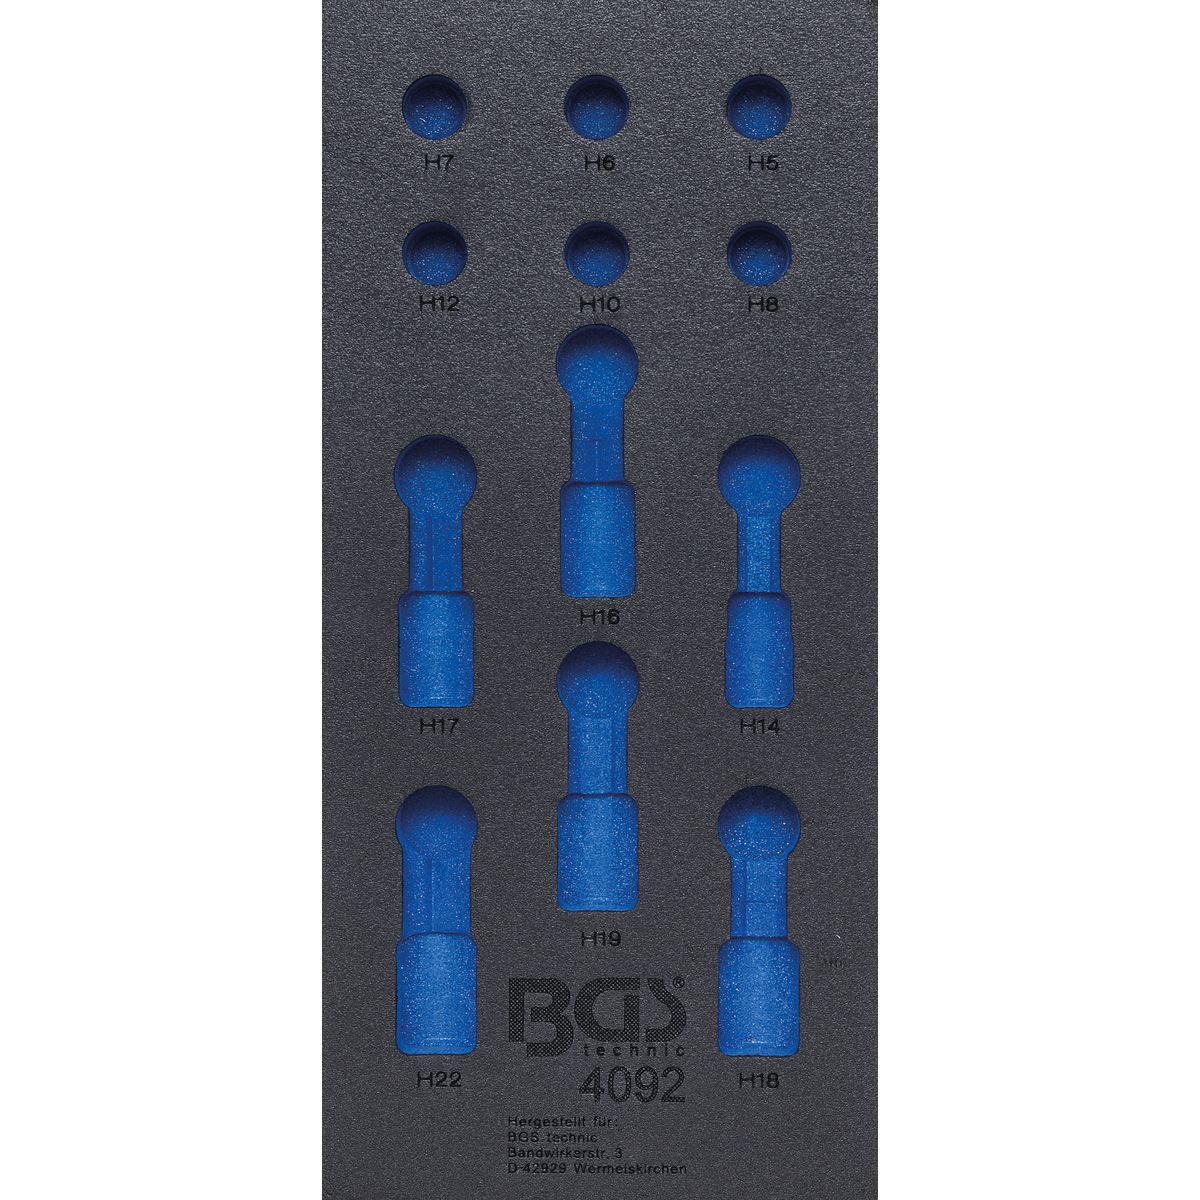 Tool Tray 1/3, empty | for BGS 4092